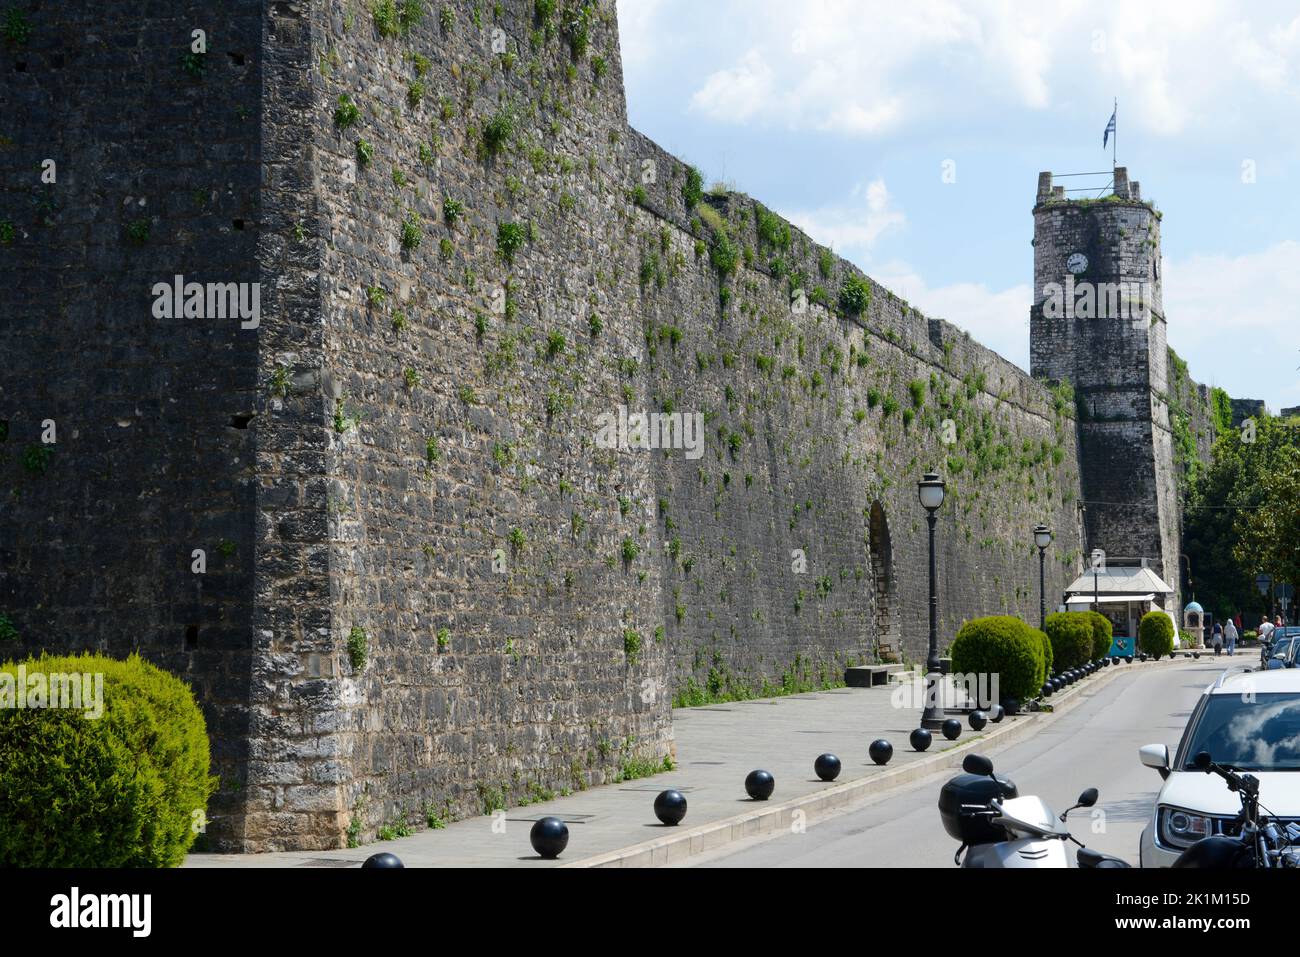 Ioannina, Greece - 16 May 2022: view at the castle of Ioannina on Greece Stock Photo